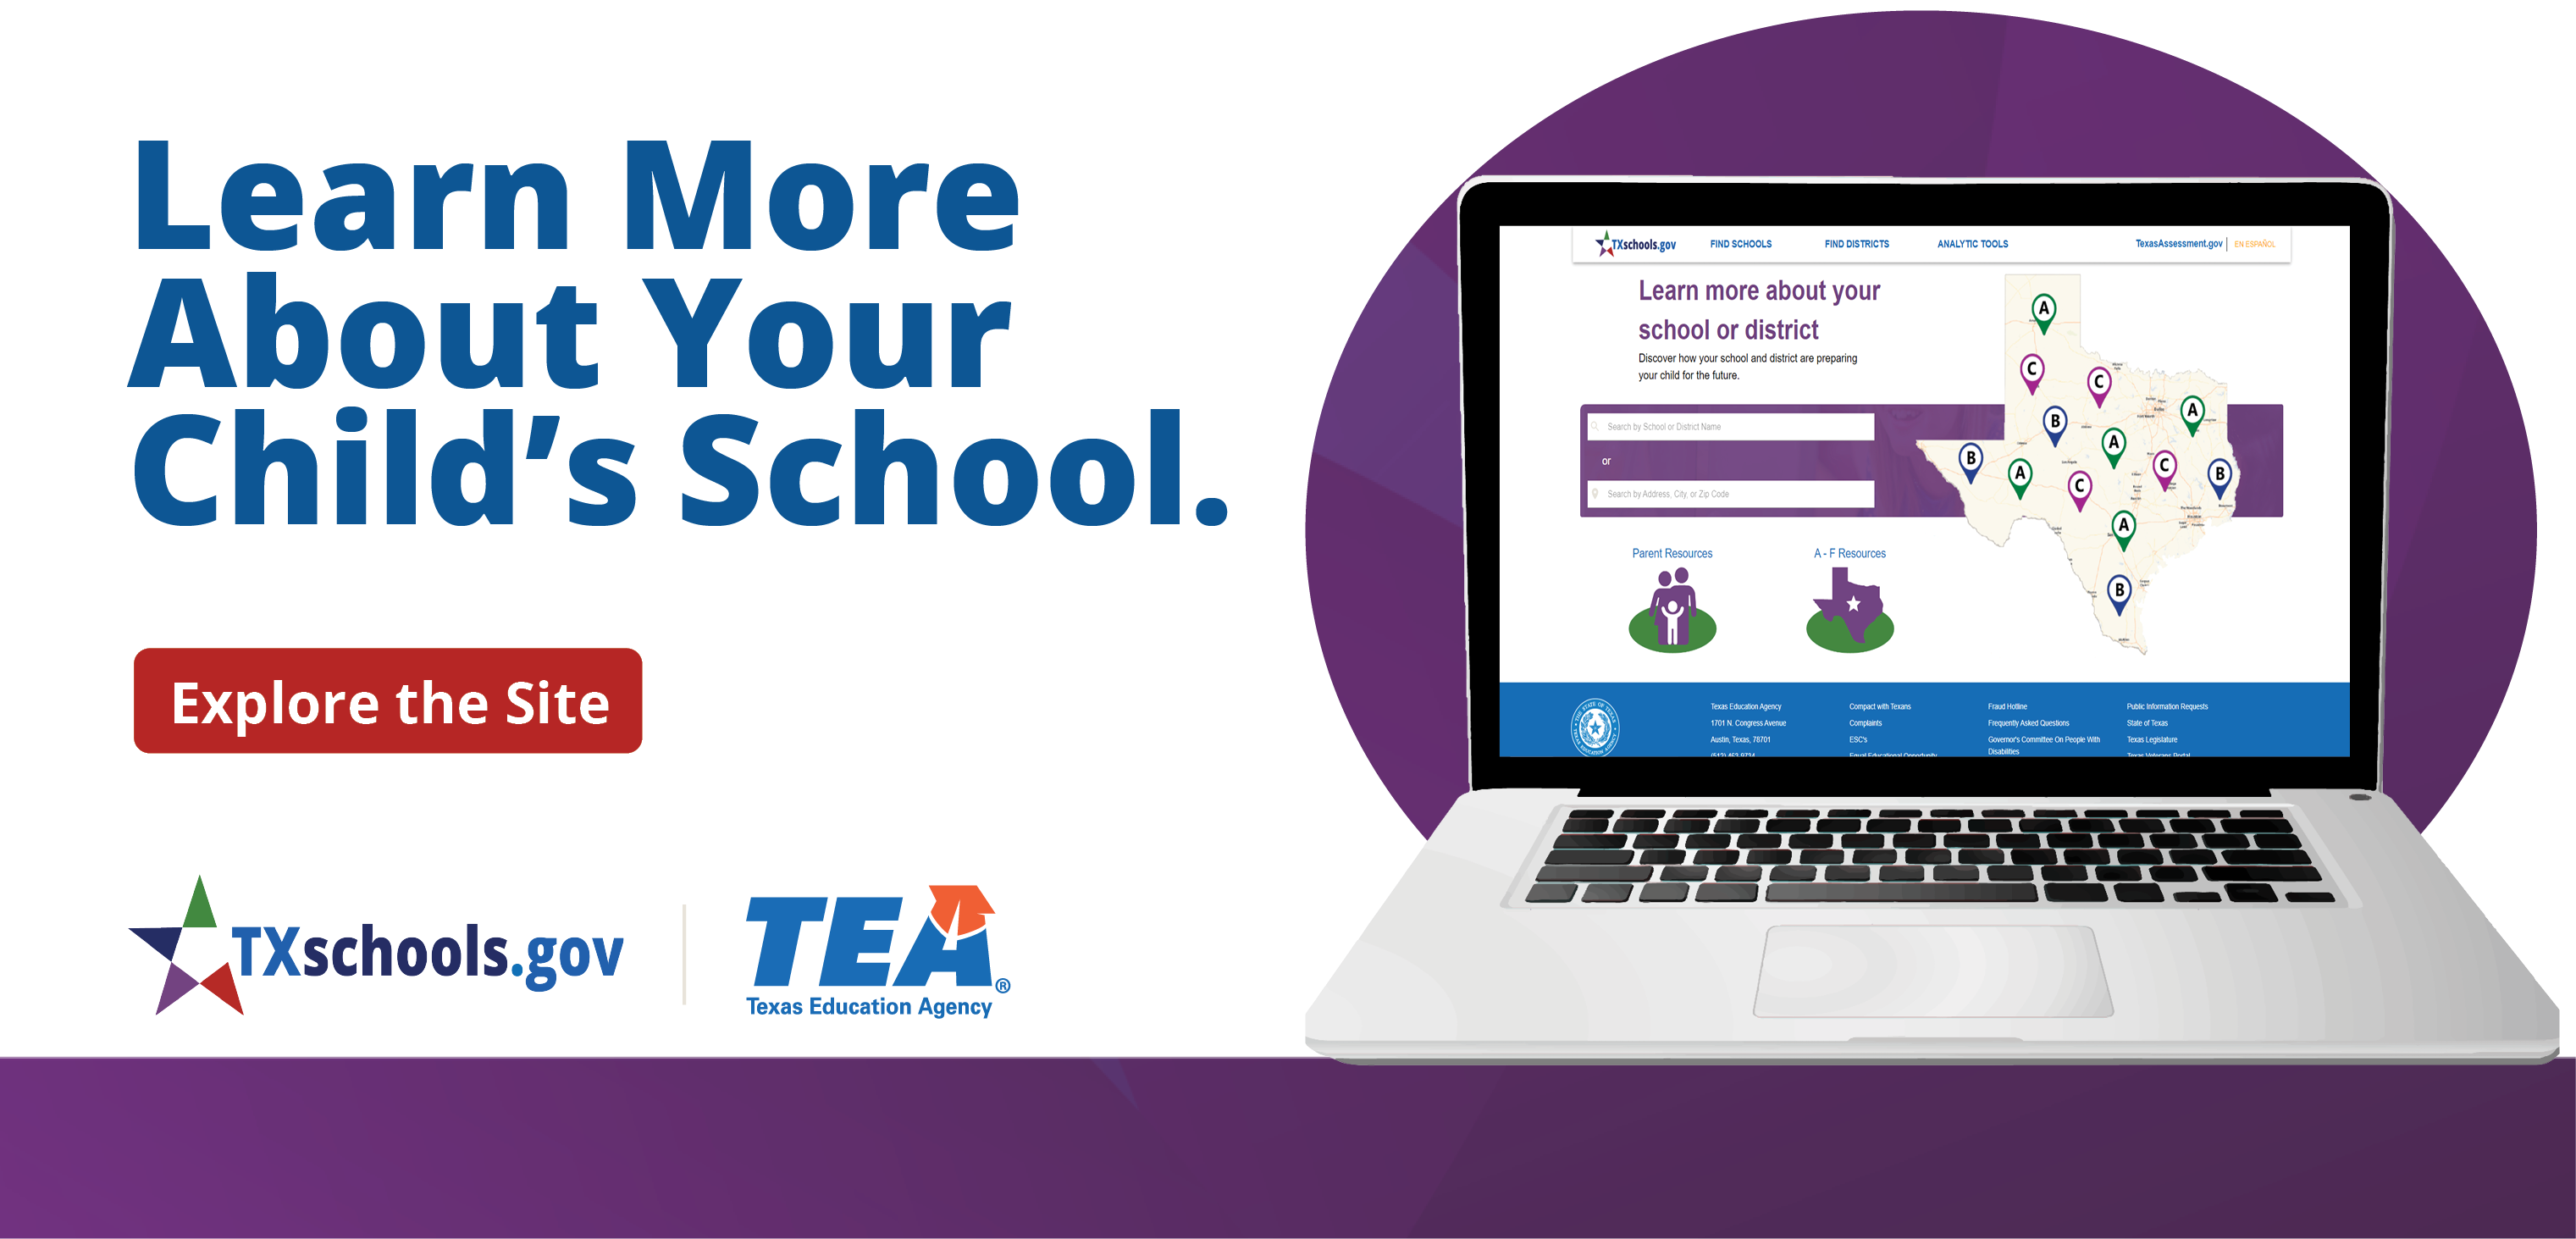 visit TXschools.gov to learn more about your child's school